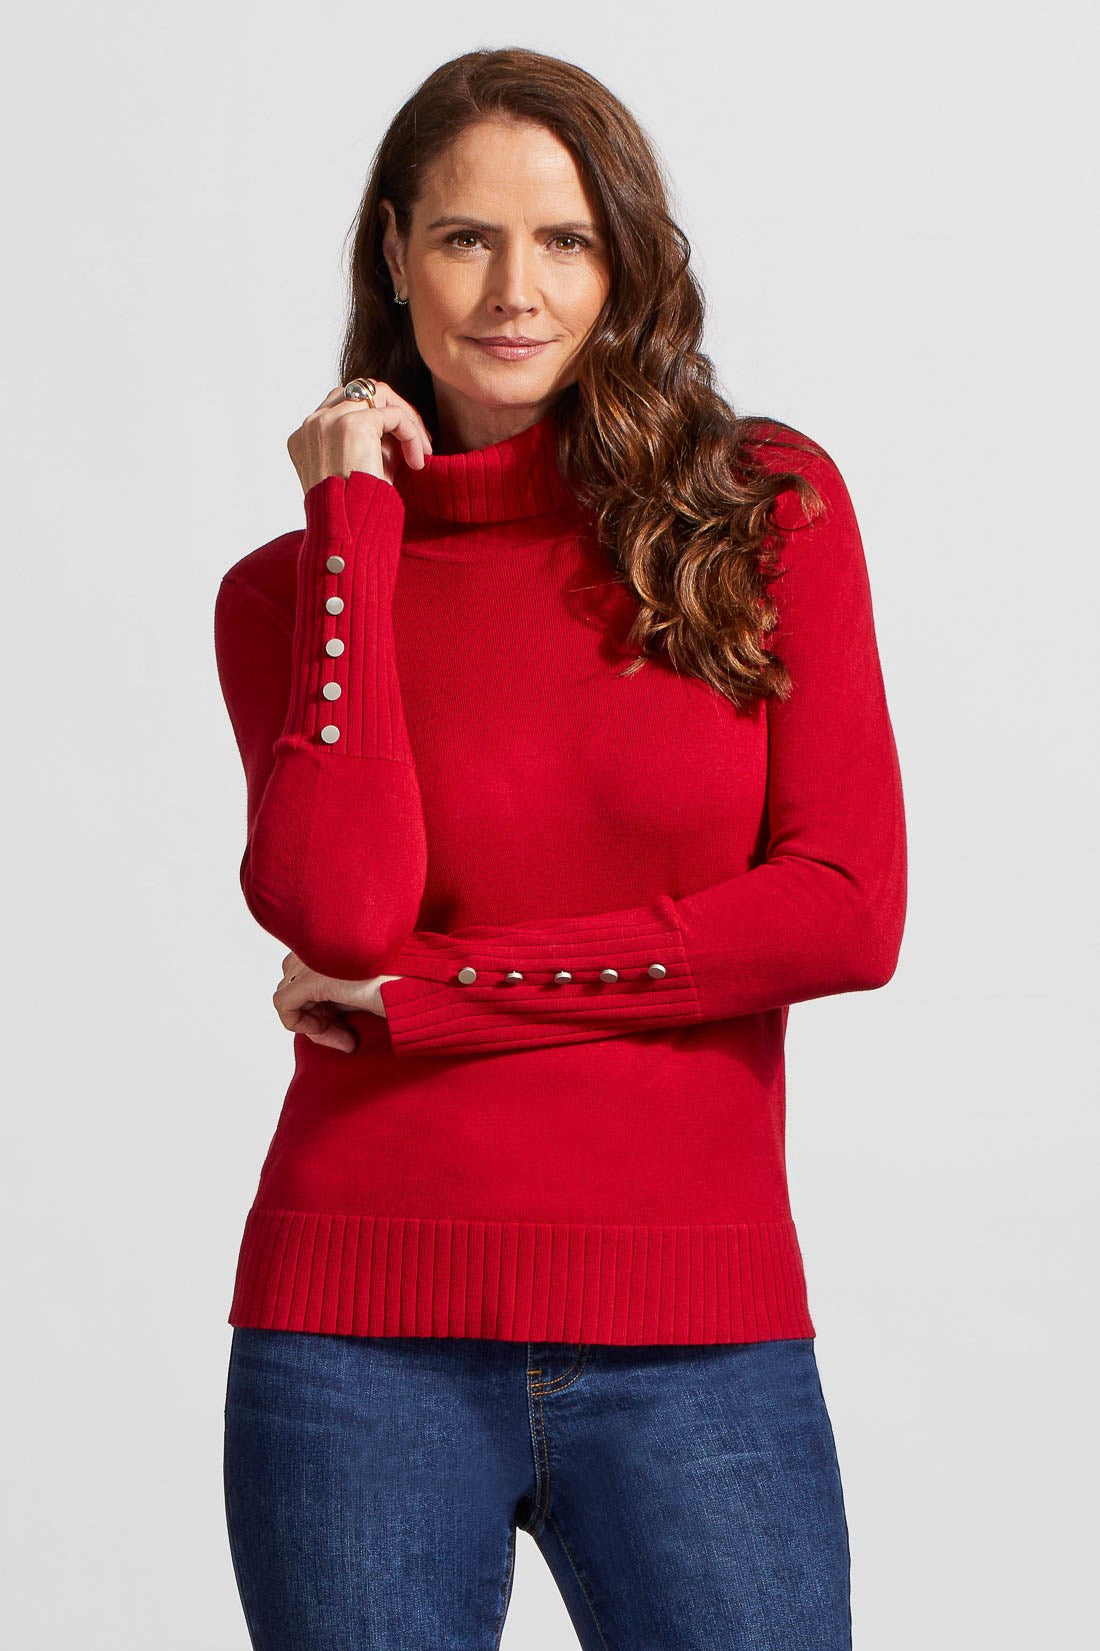 Turtle Neck Sweater - TWO COLORS AVAILABLE - FINAL SALE